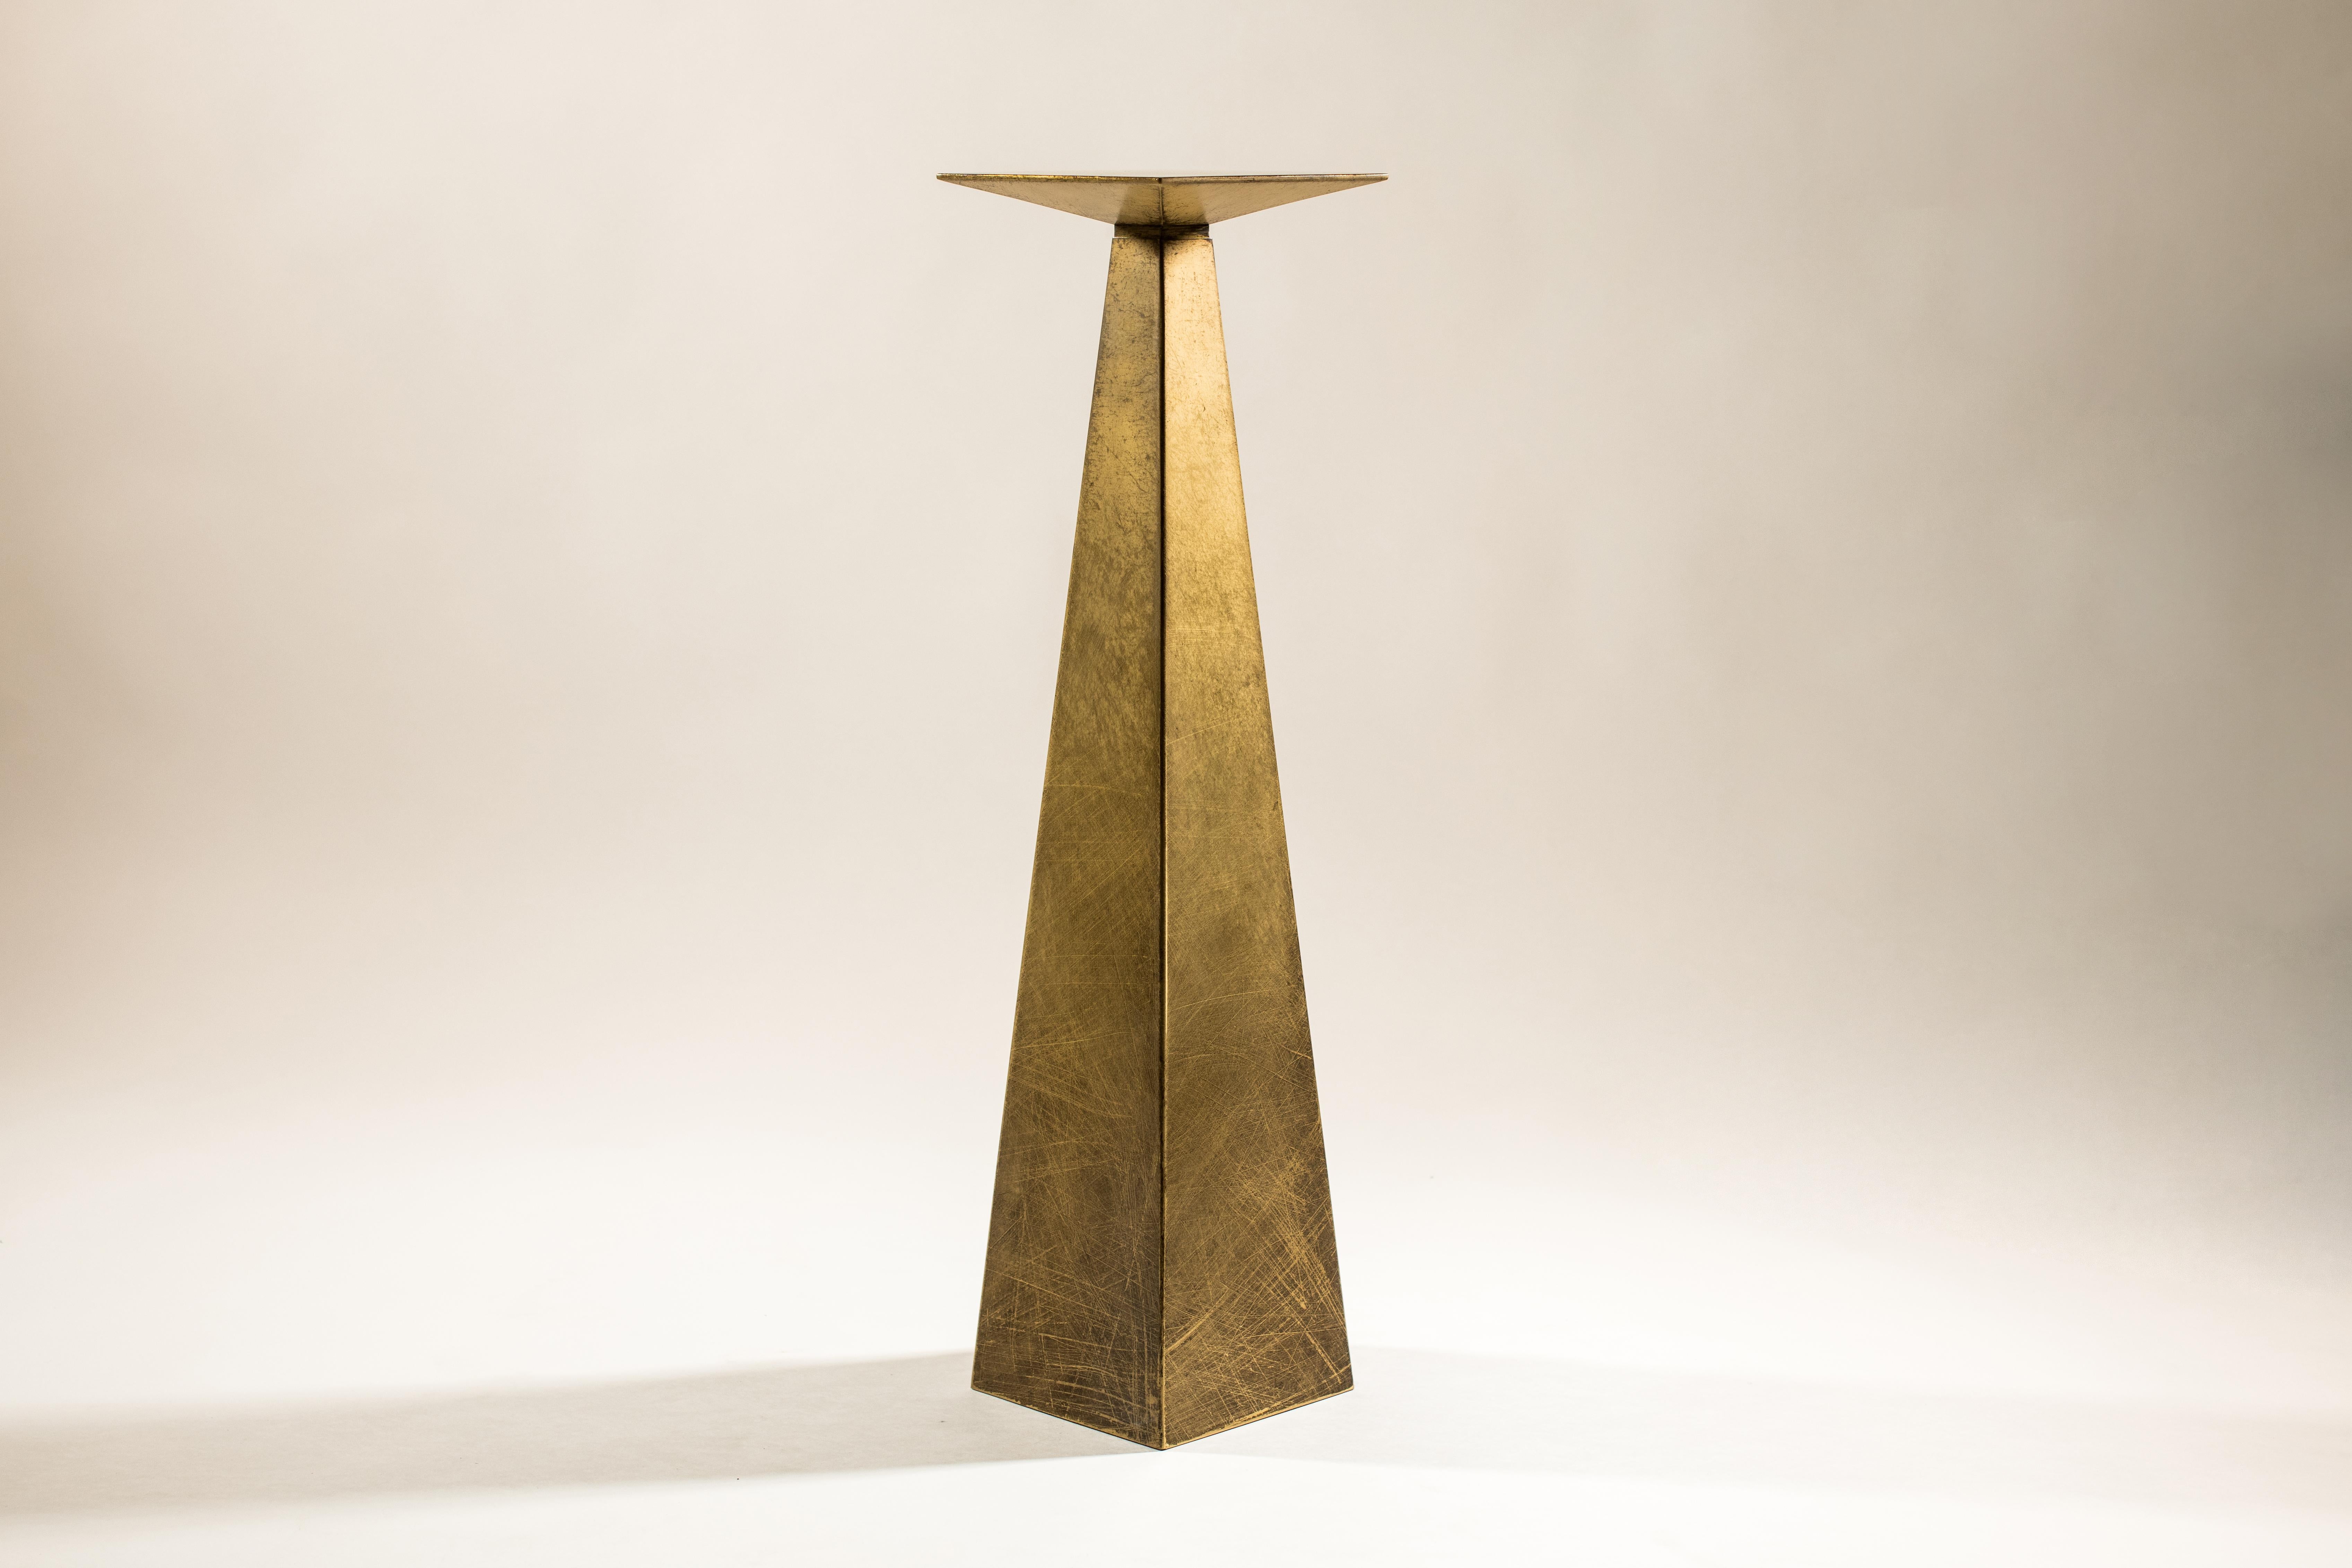 Collide Aged Brass Side Table by Pietro Franceschini
Sold exclusively by Galerie Philia
Materials: Aged brass
Dimensions: W 19cm L 19cm H 73cm
Origin: Italy 
Manufacturer: Fonderia Artù

Pietro Franceschini
Pietro Franceschini is an architect and